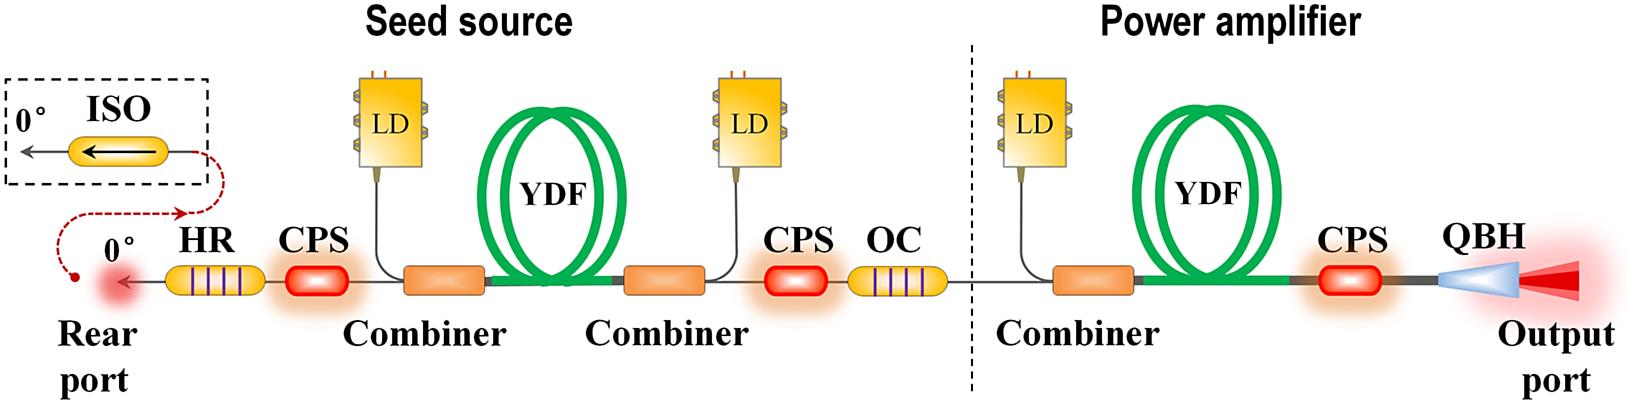 Schematic of the experimental setup. CPS, cladding power stripper; ISO, fiber isolator; LD, laser diode; QBH, quartz block holder; YDF, Yb-doped double-cladding fiber.